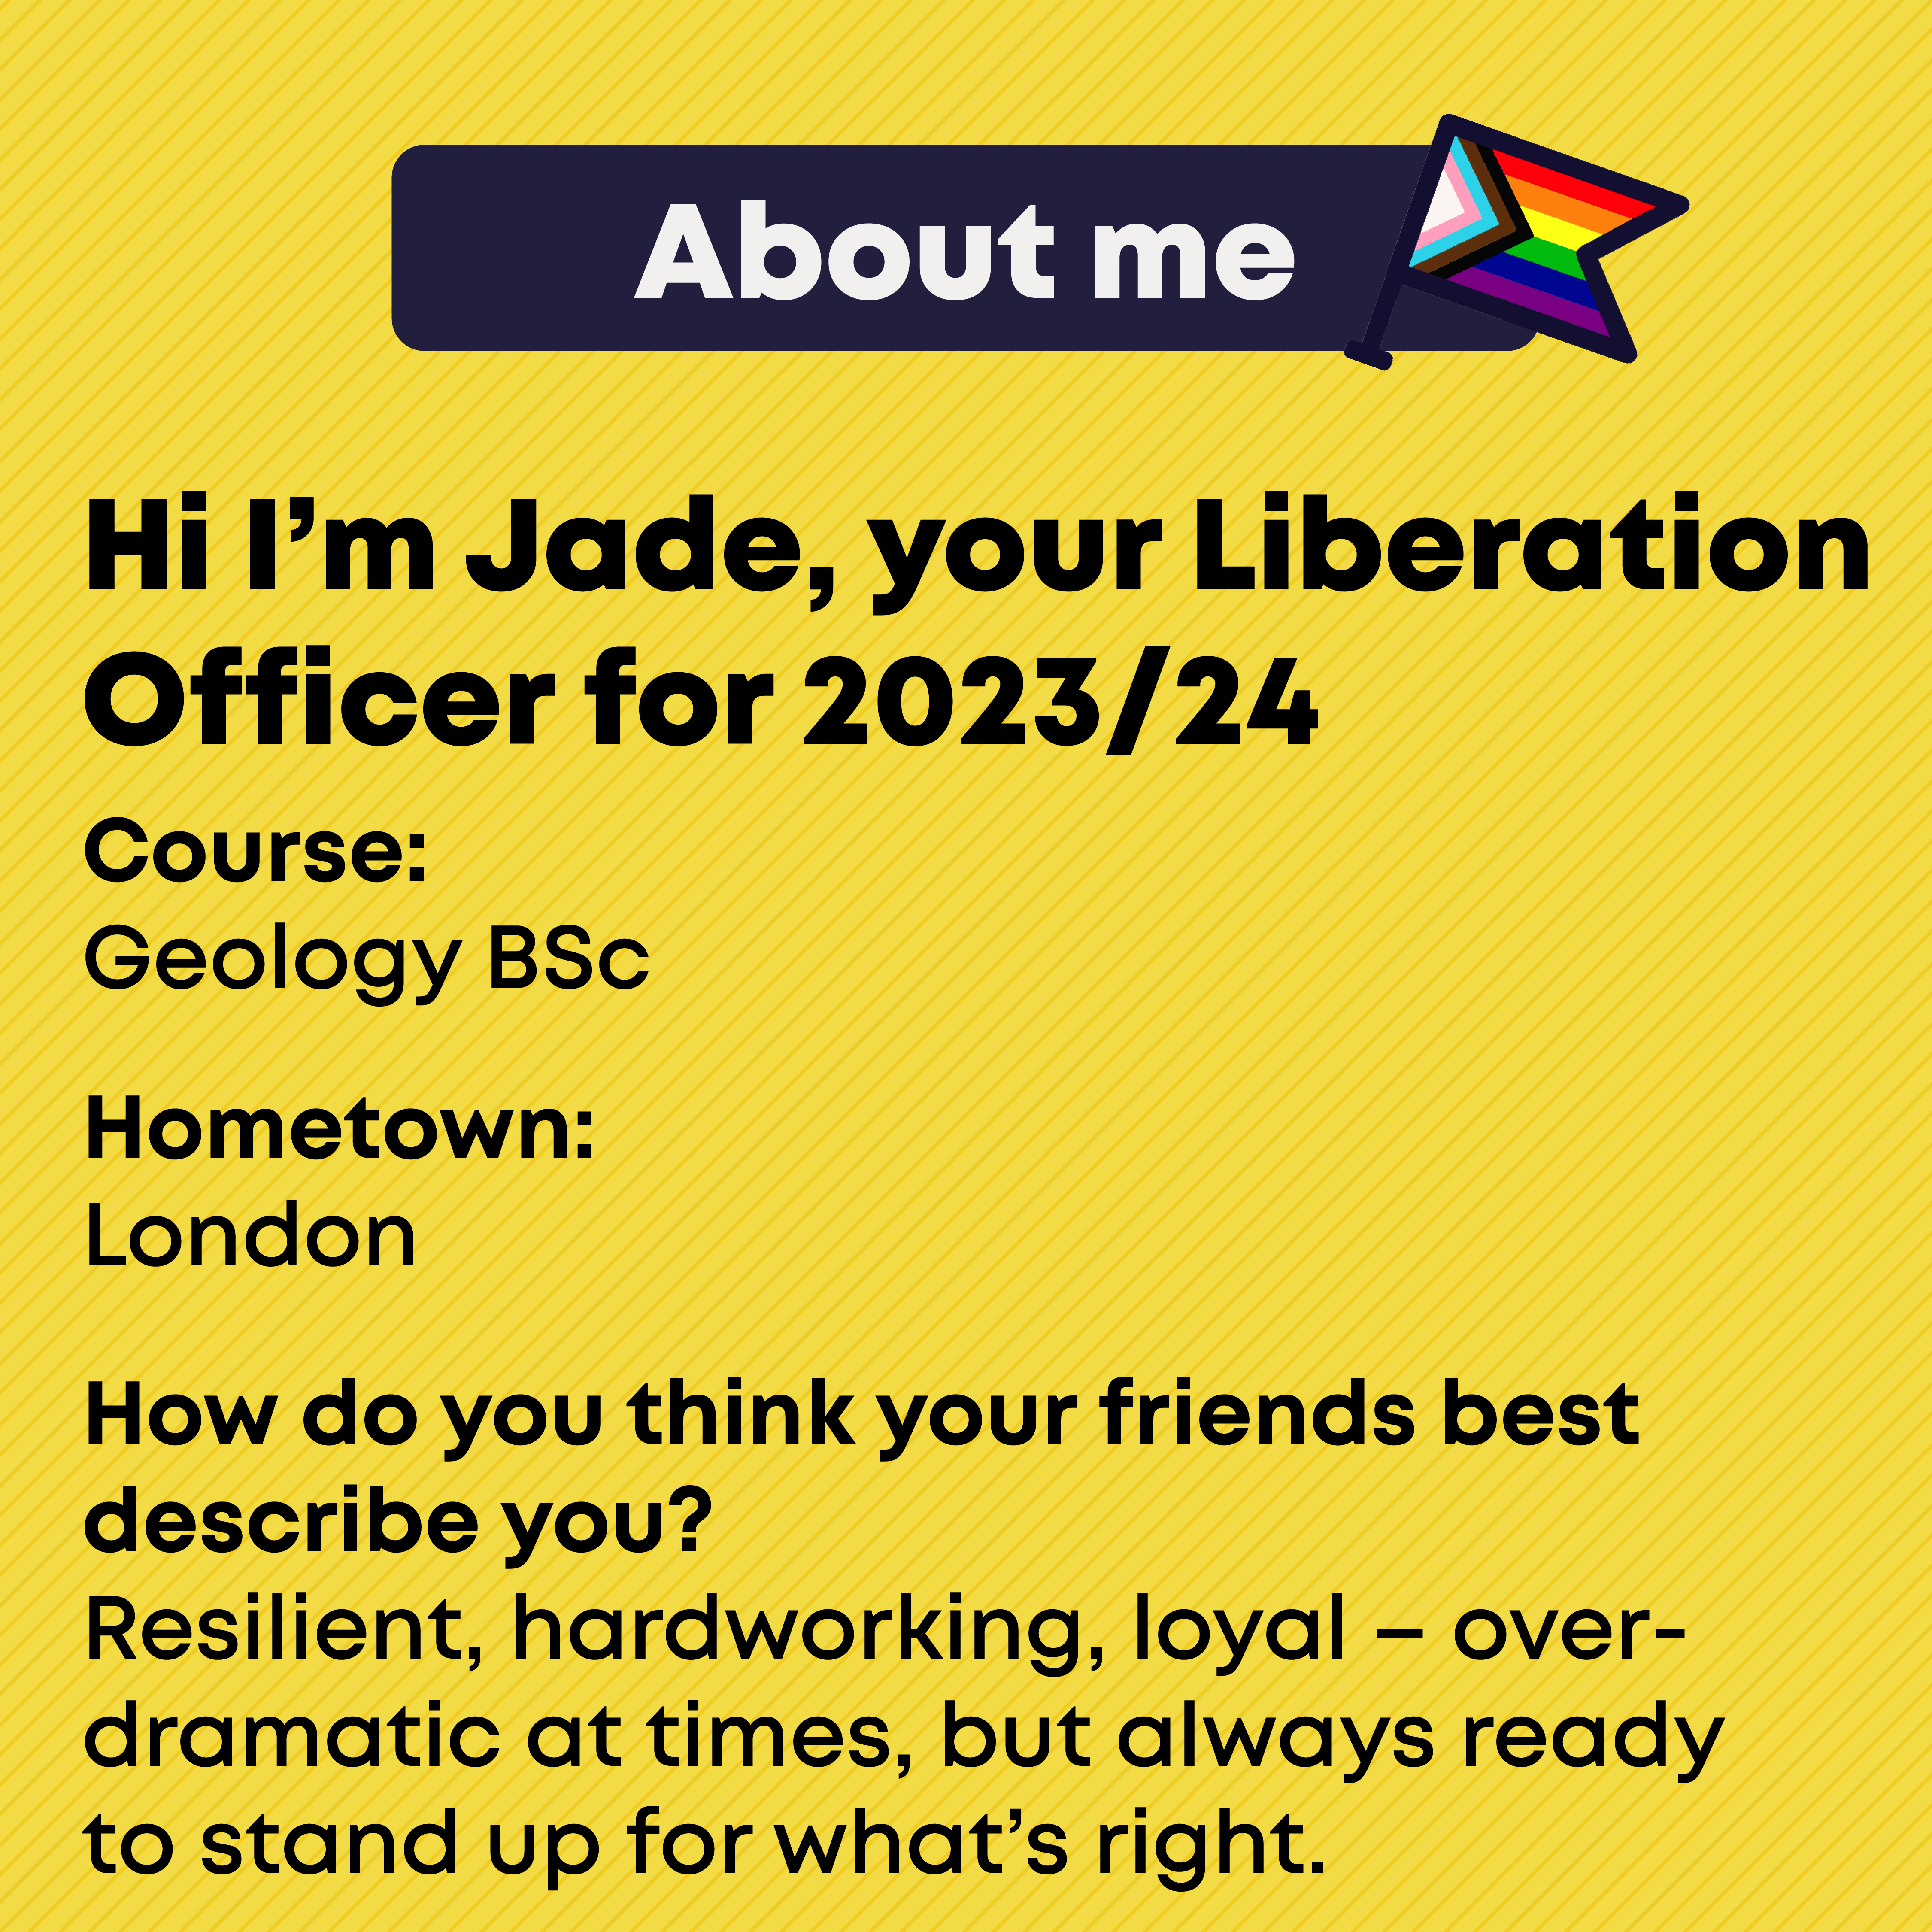 Hi I'm Jade, your liberation officer for 2023/24. About Me. Course: Geology BSc Hometown: London How do you think your friends best describe you? Resilient, hardworking, loyal – overdramatic at times, but always ready to stand up for what’s right.